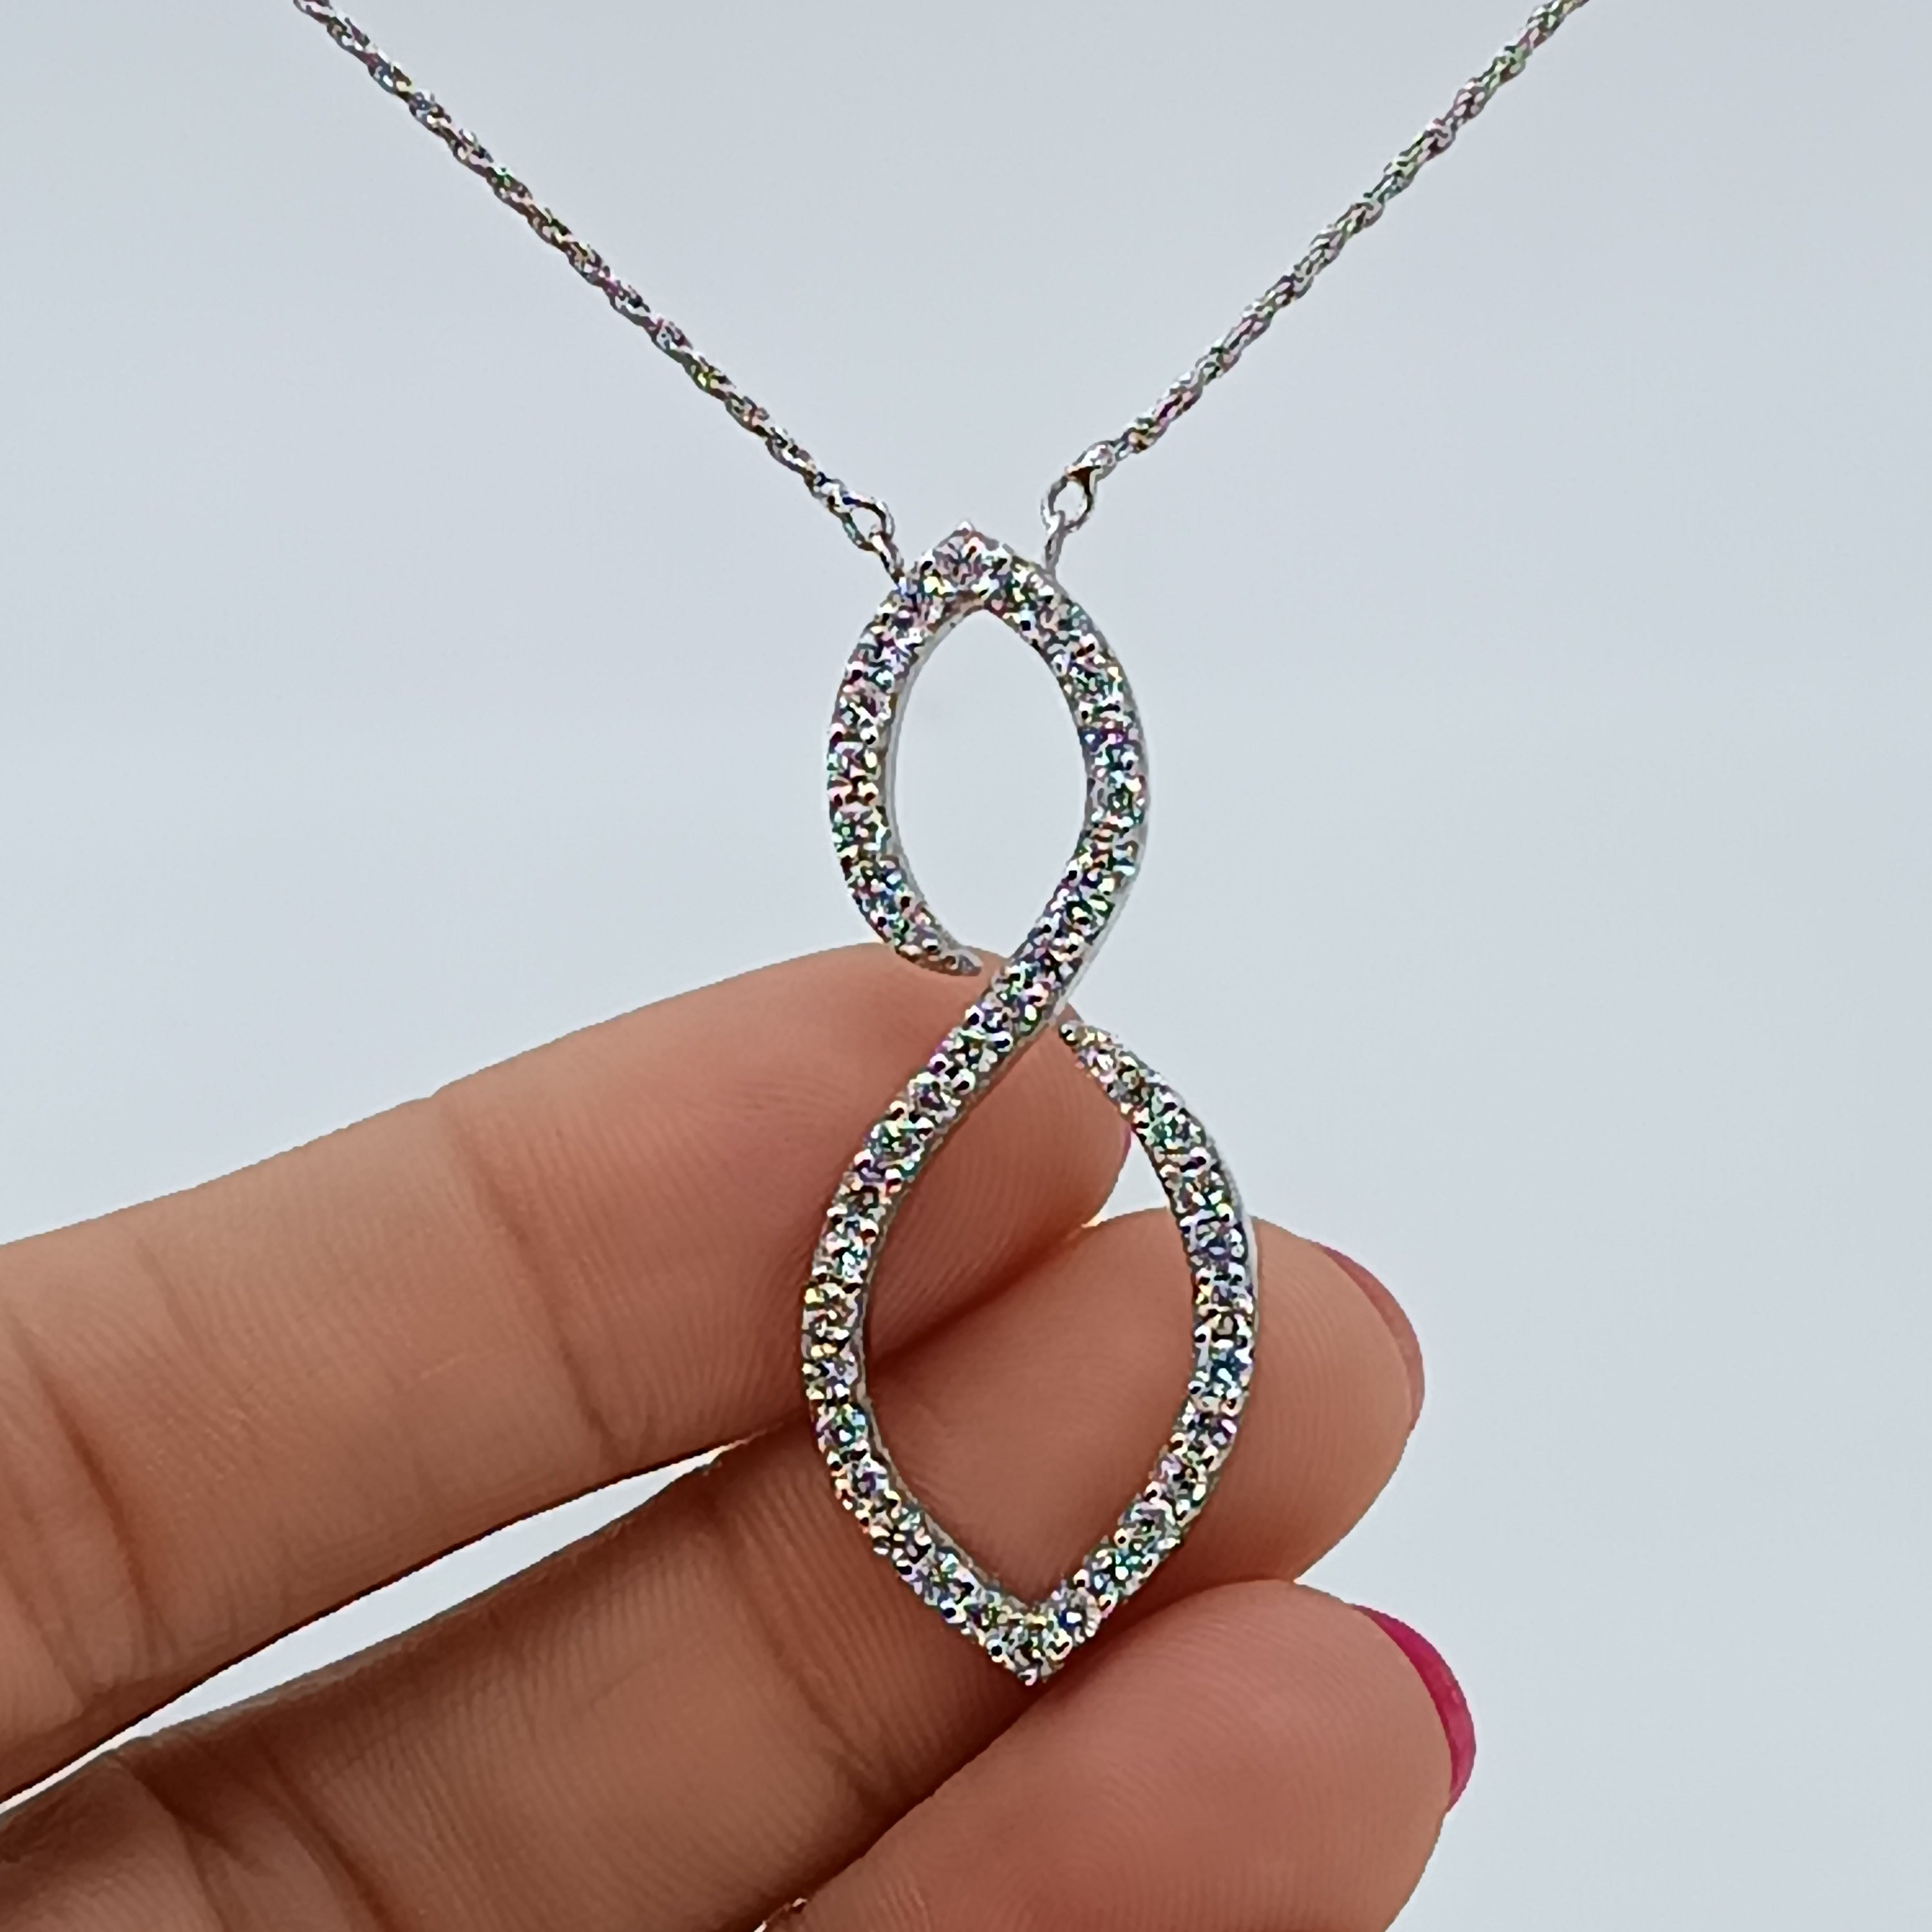 1.23 Carat Vs G Diamonds on 18 Carat White Gold Pendant the Object Weighs 10.29 For Sale